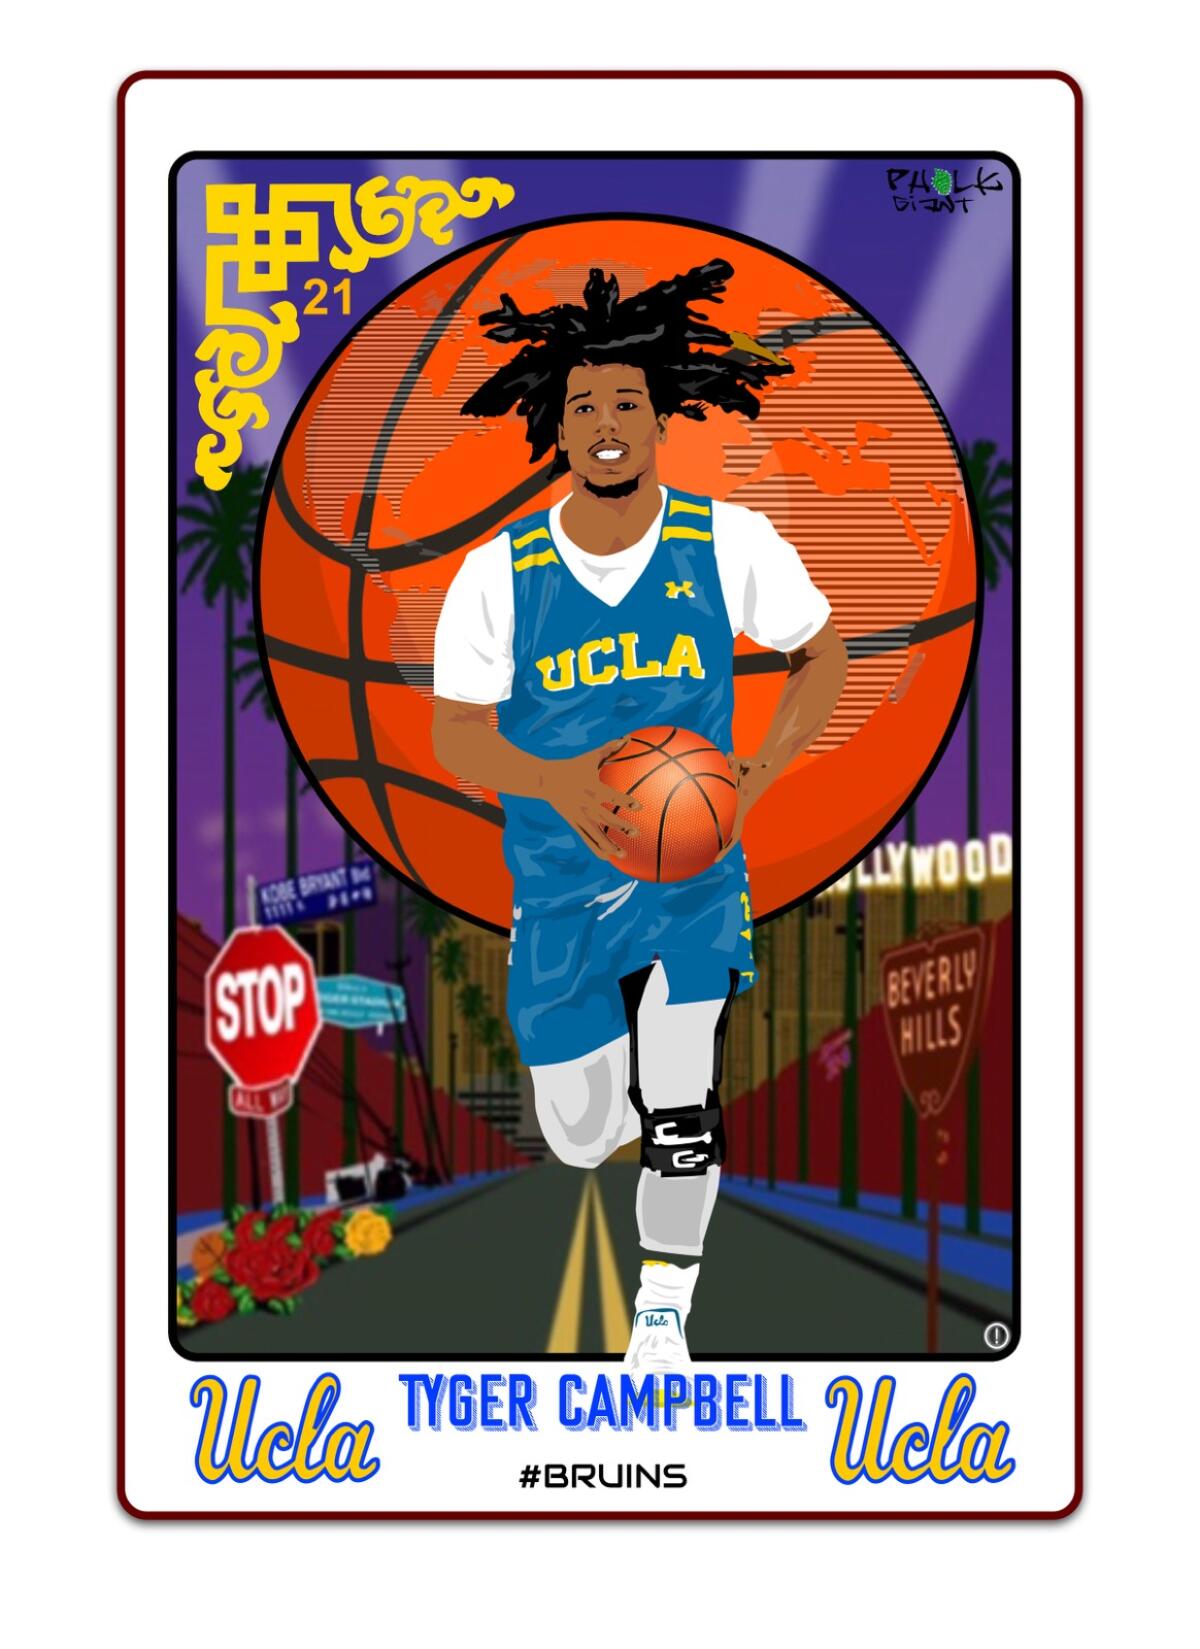 A Tyger Campbell trading card